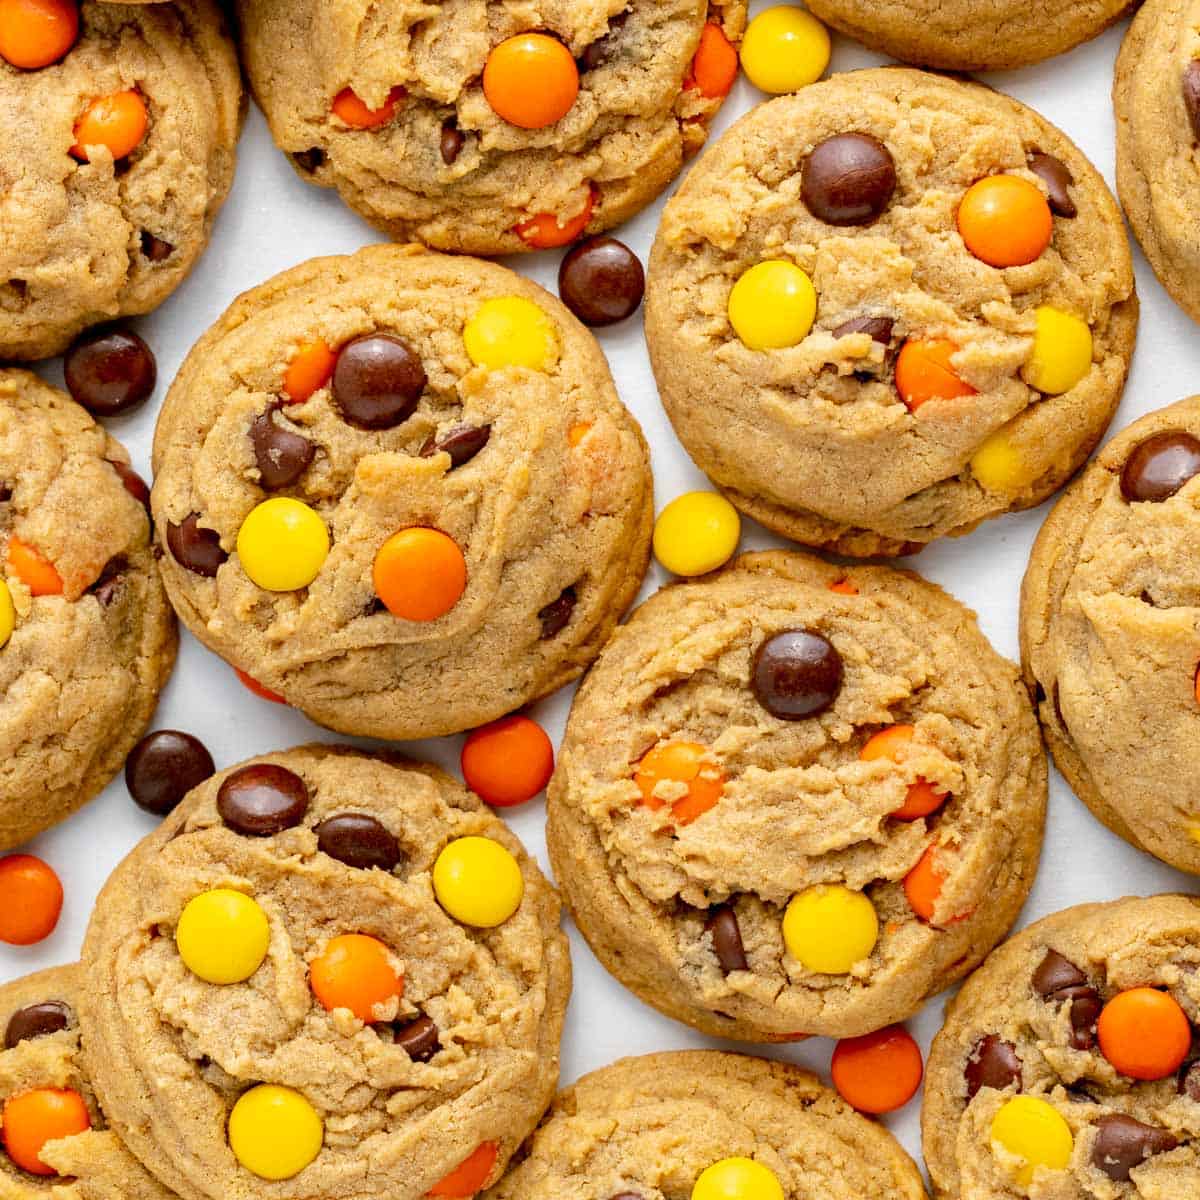 Reese’s Pieces Peanut Butter Cookies